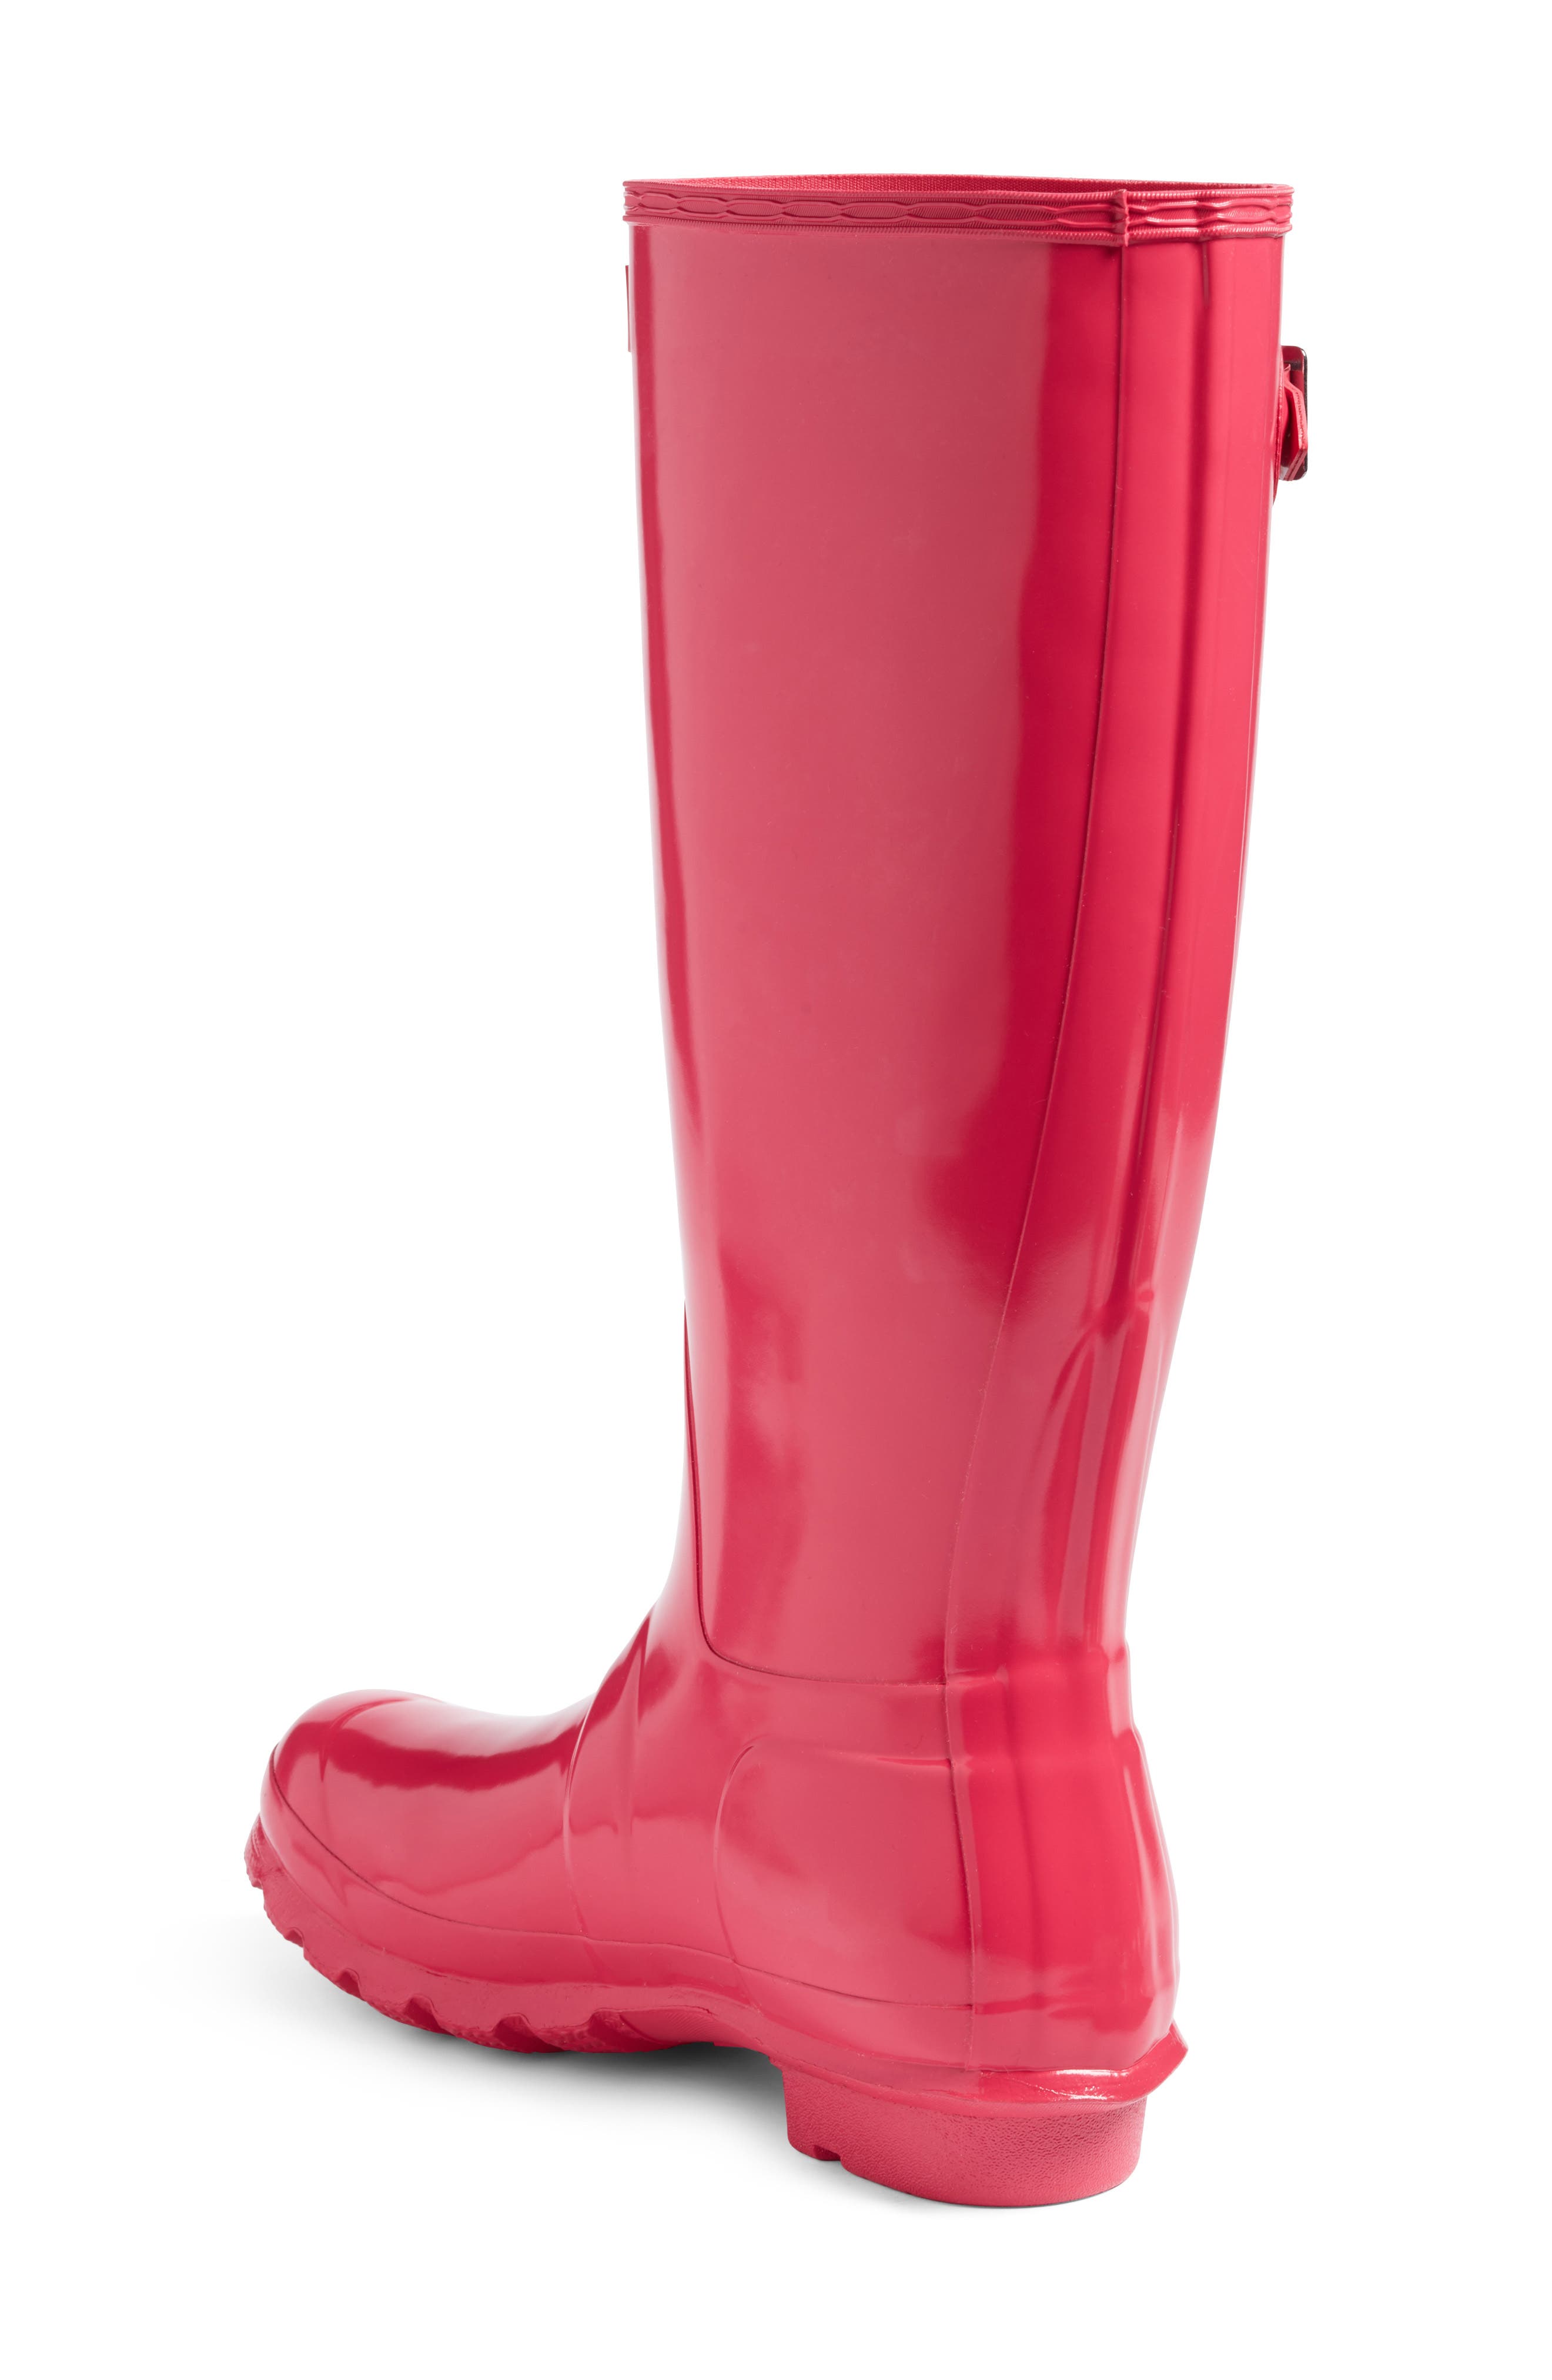 rain boots with bows on back